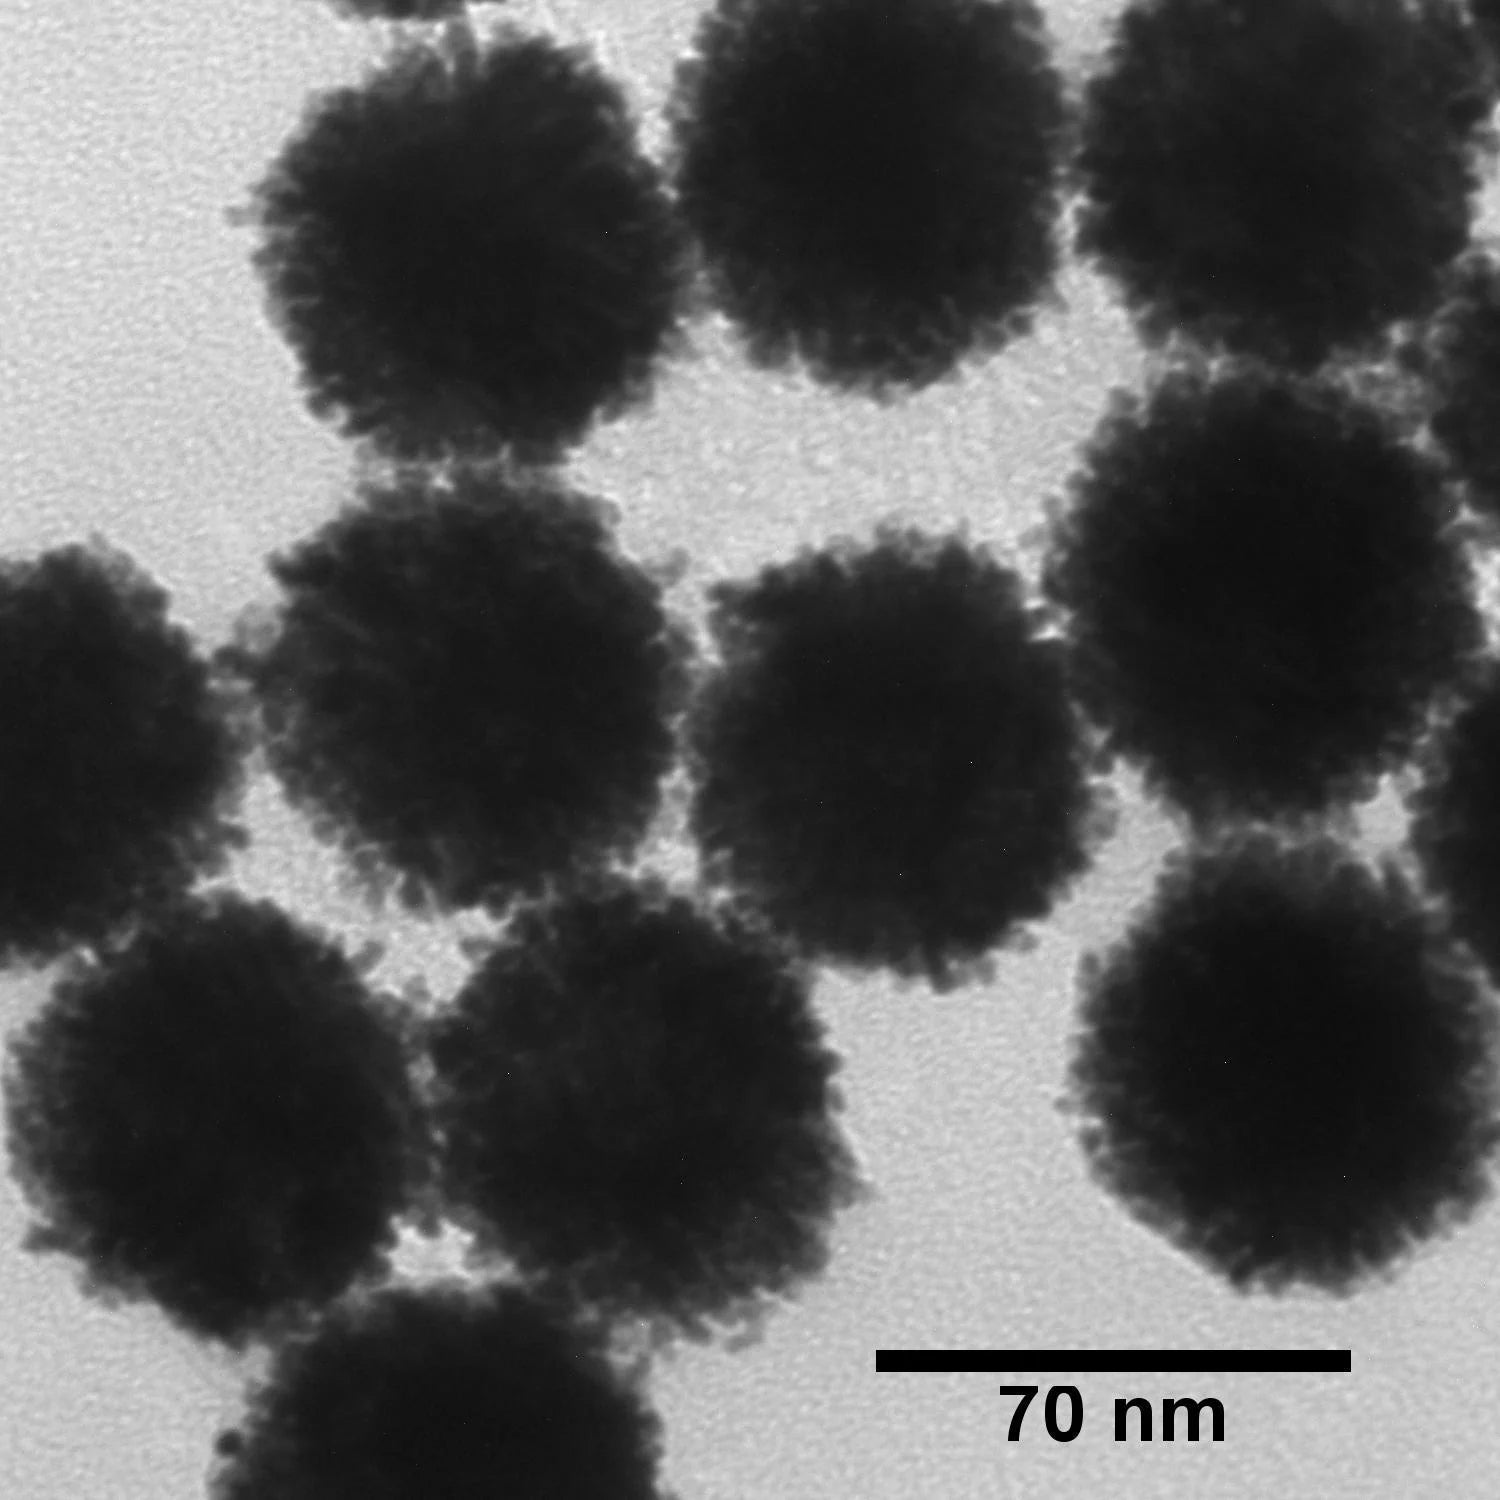 Transmission Electron Microscope (TEM) image of 70 nm platinum nanoparticles produced by nanoComposix